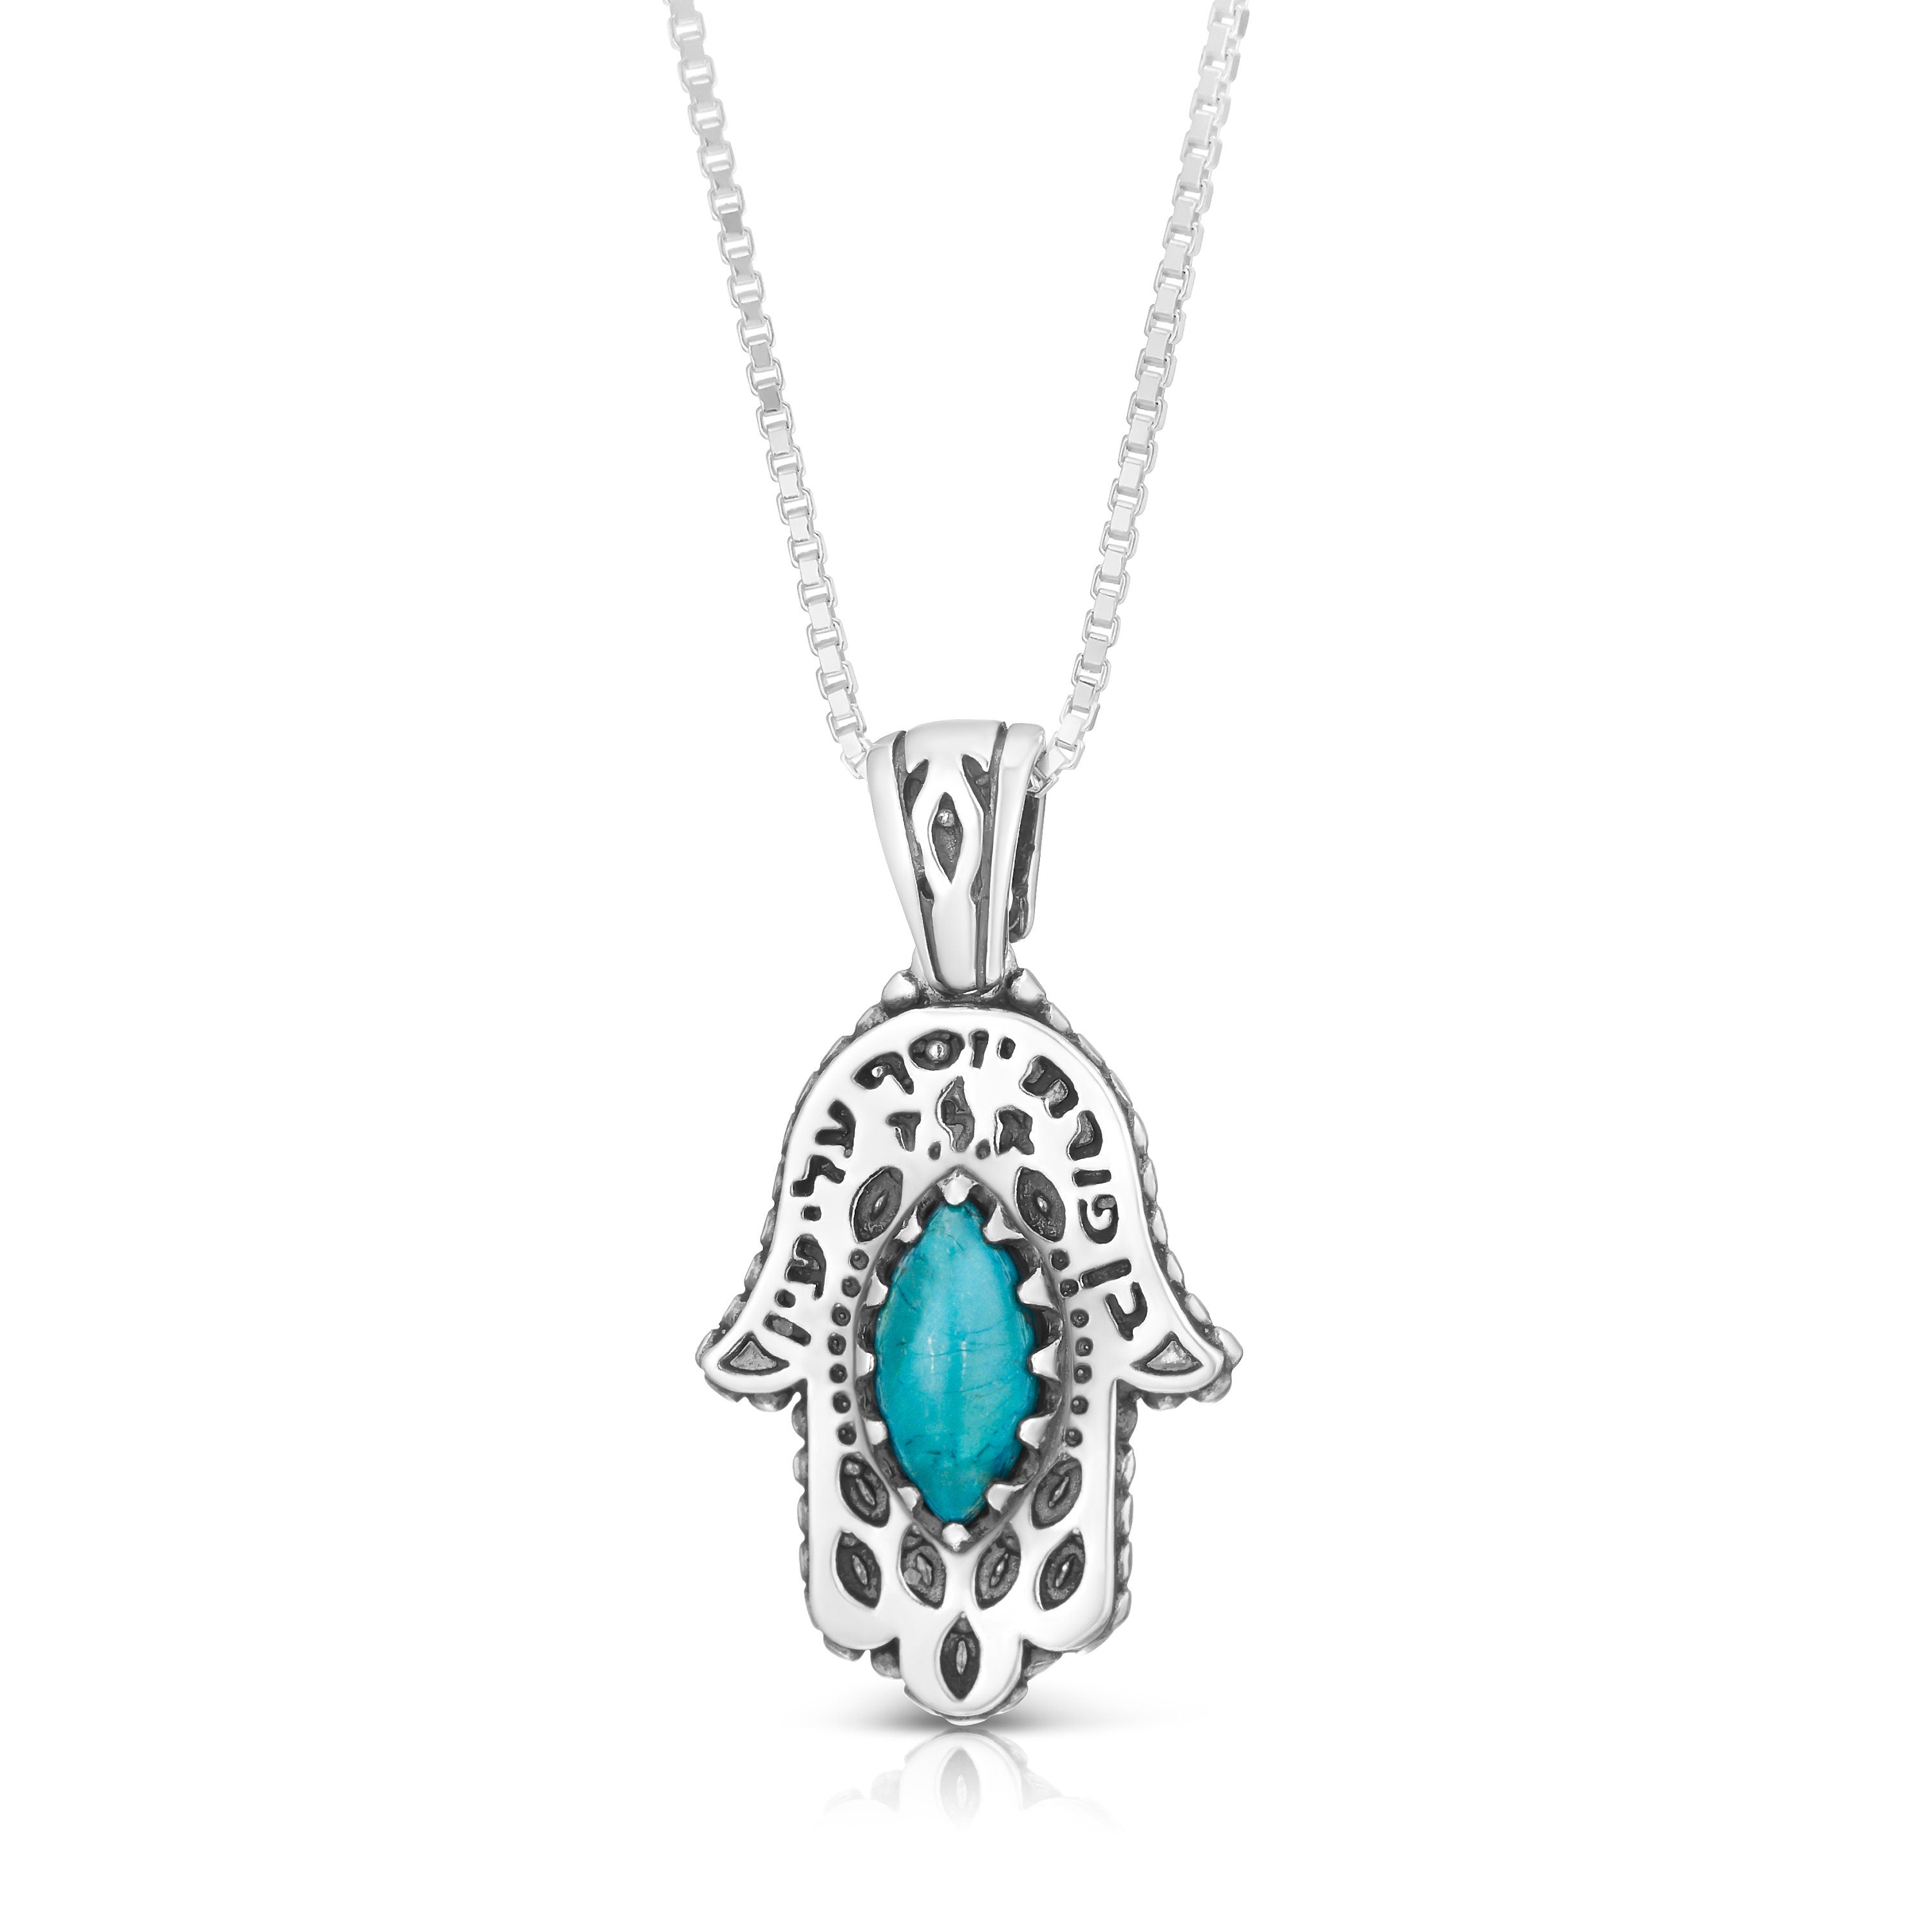 Sterling Silver Hamsa Pendant with Turquoise Stone | The Ideal Bar Mitzvah Gift | Turquoise Color Necklace | Girlfriend Birthday Gift